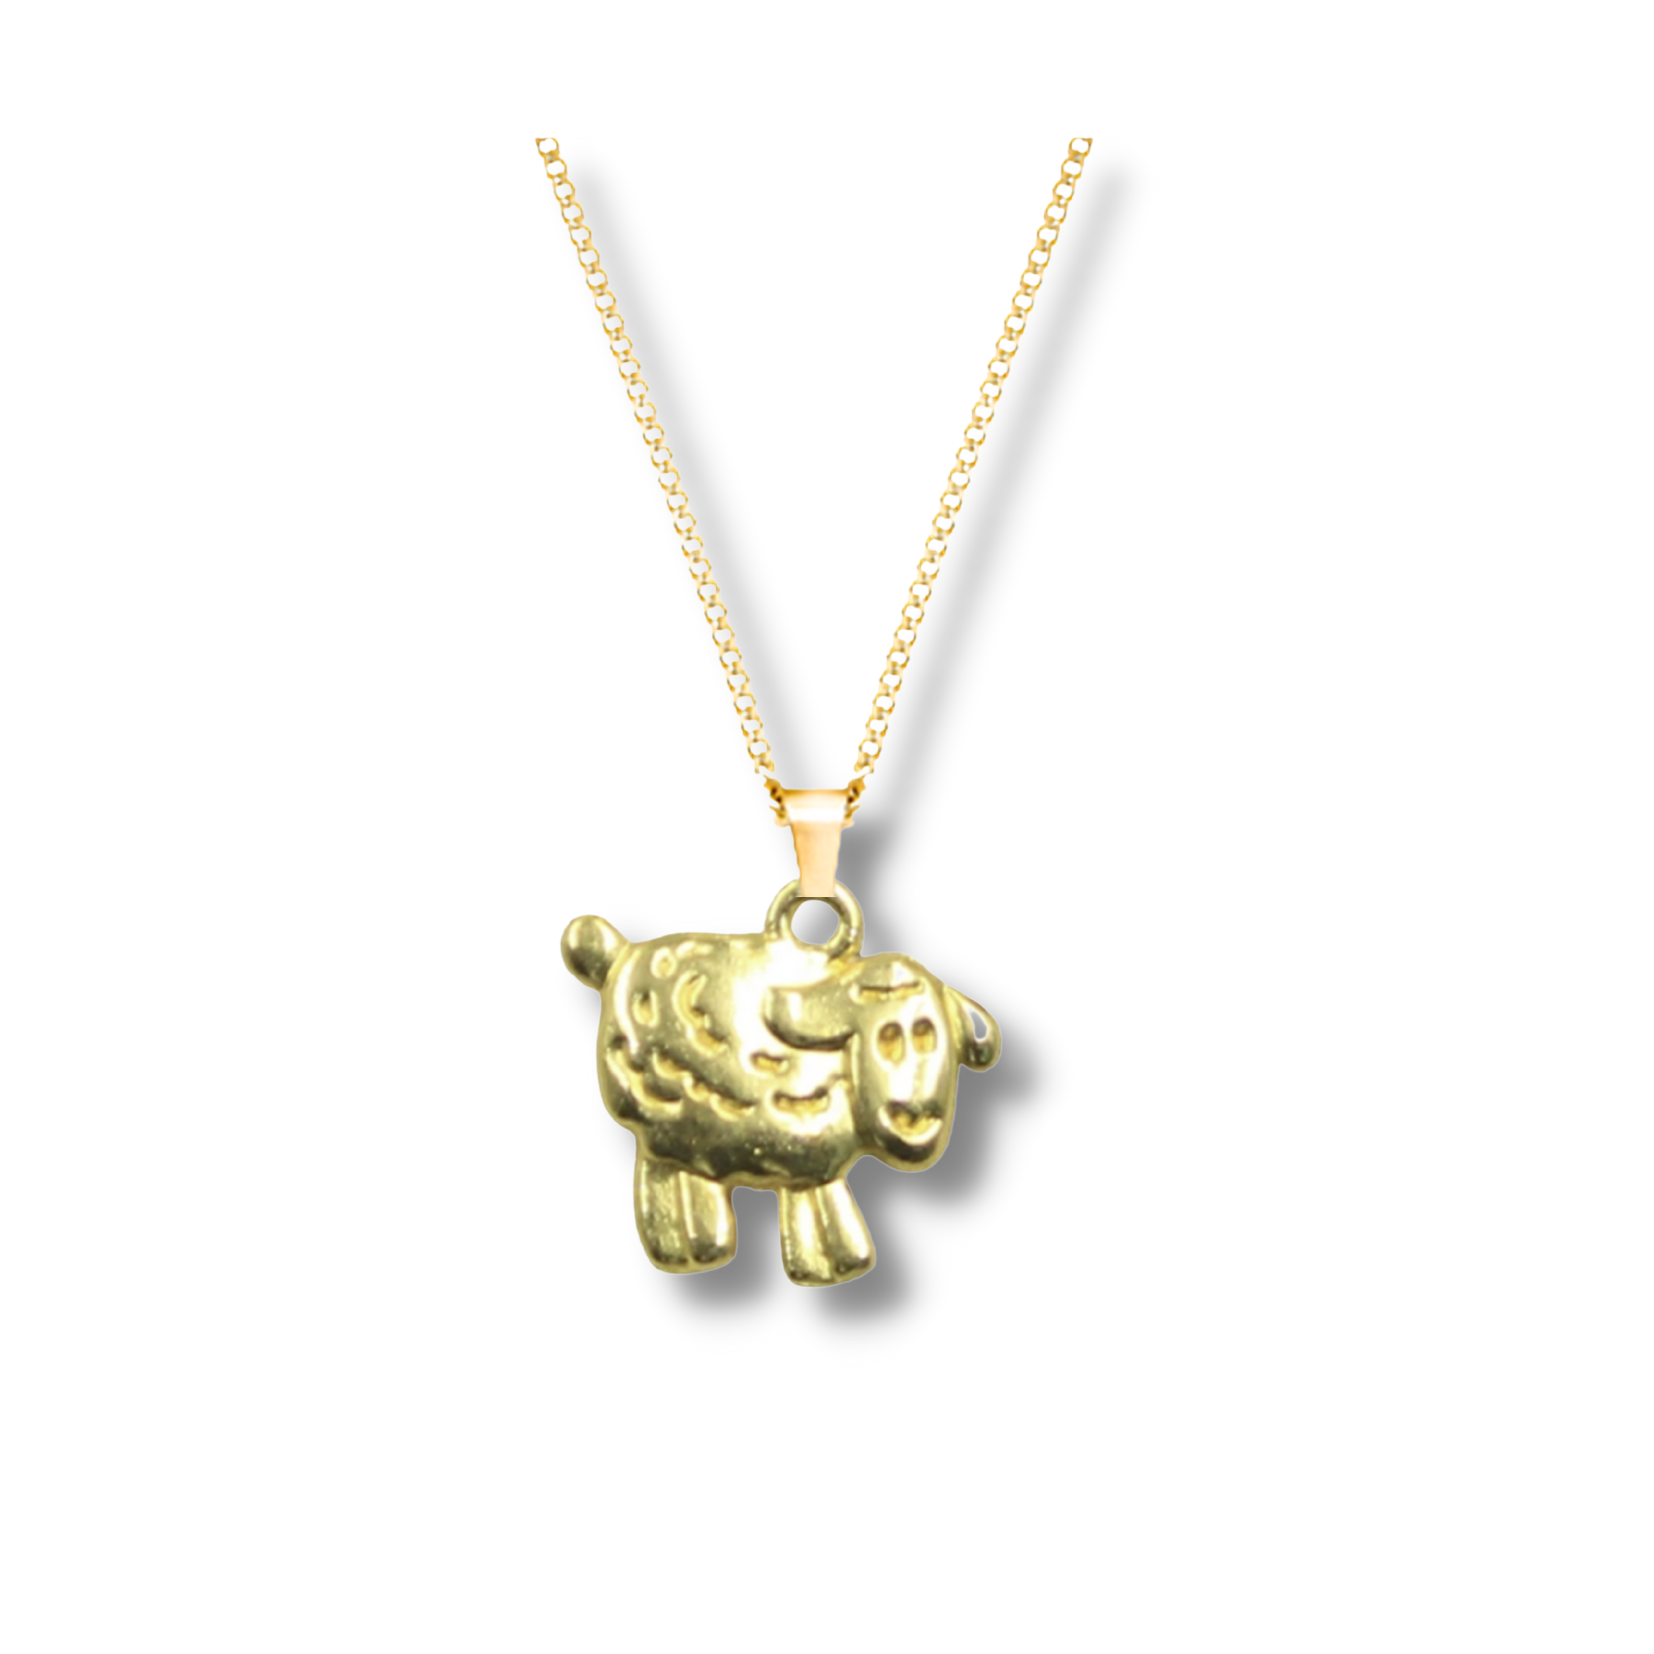 Golden Lost Sheep Necklace